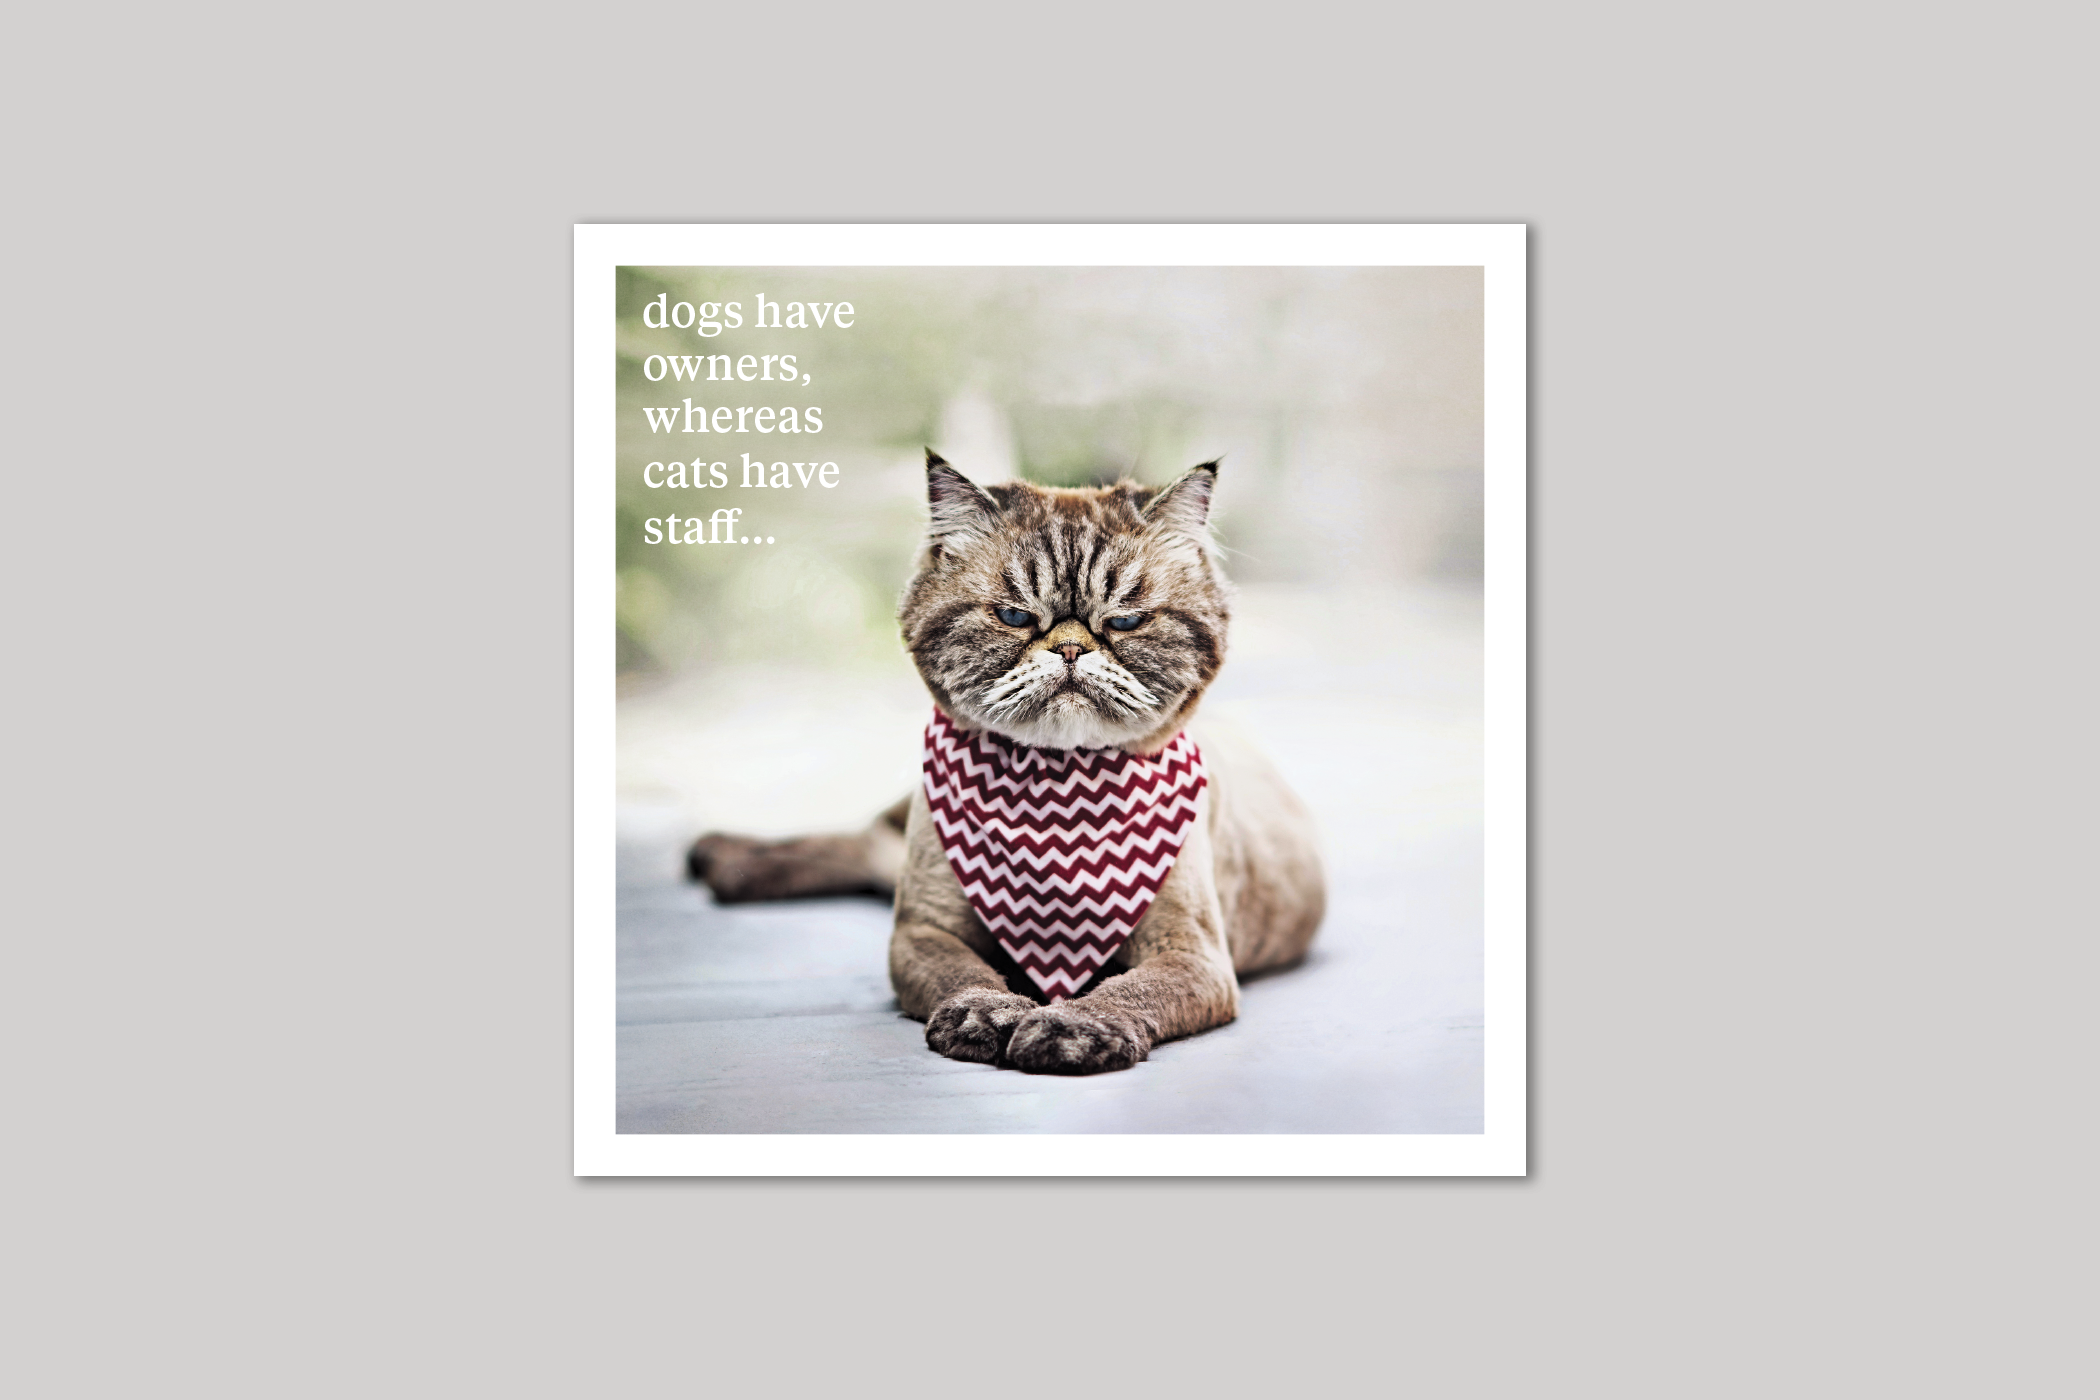 Cats Have Staff quirky animal portrait from Curious World range of greeting cards by Icon.